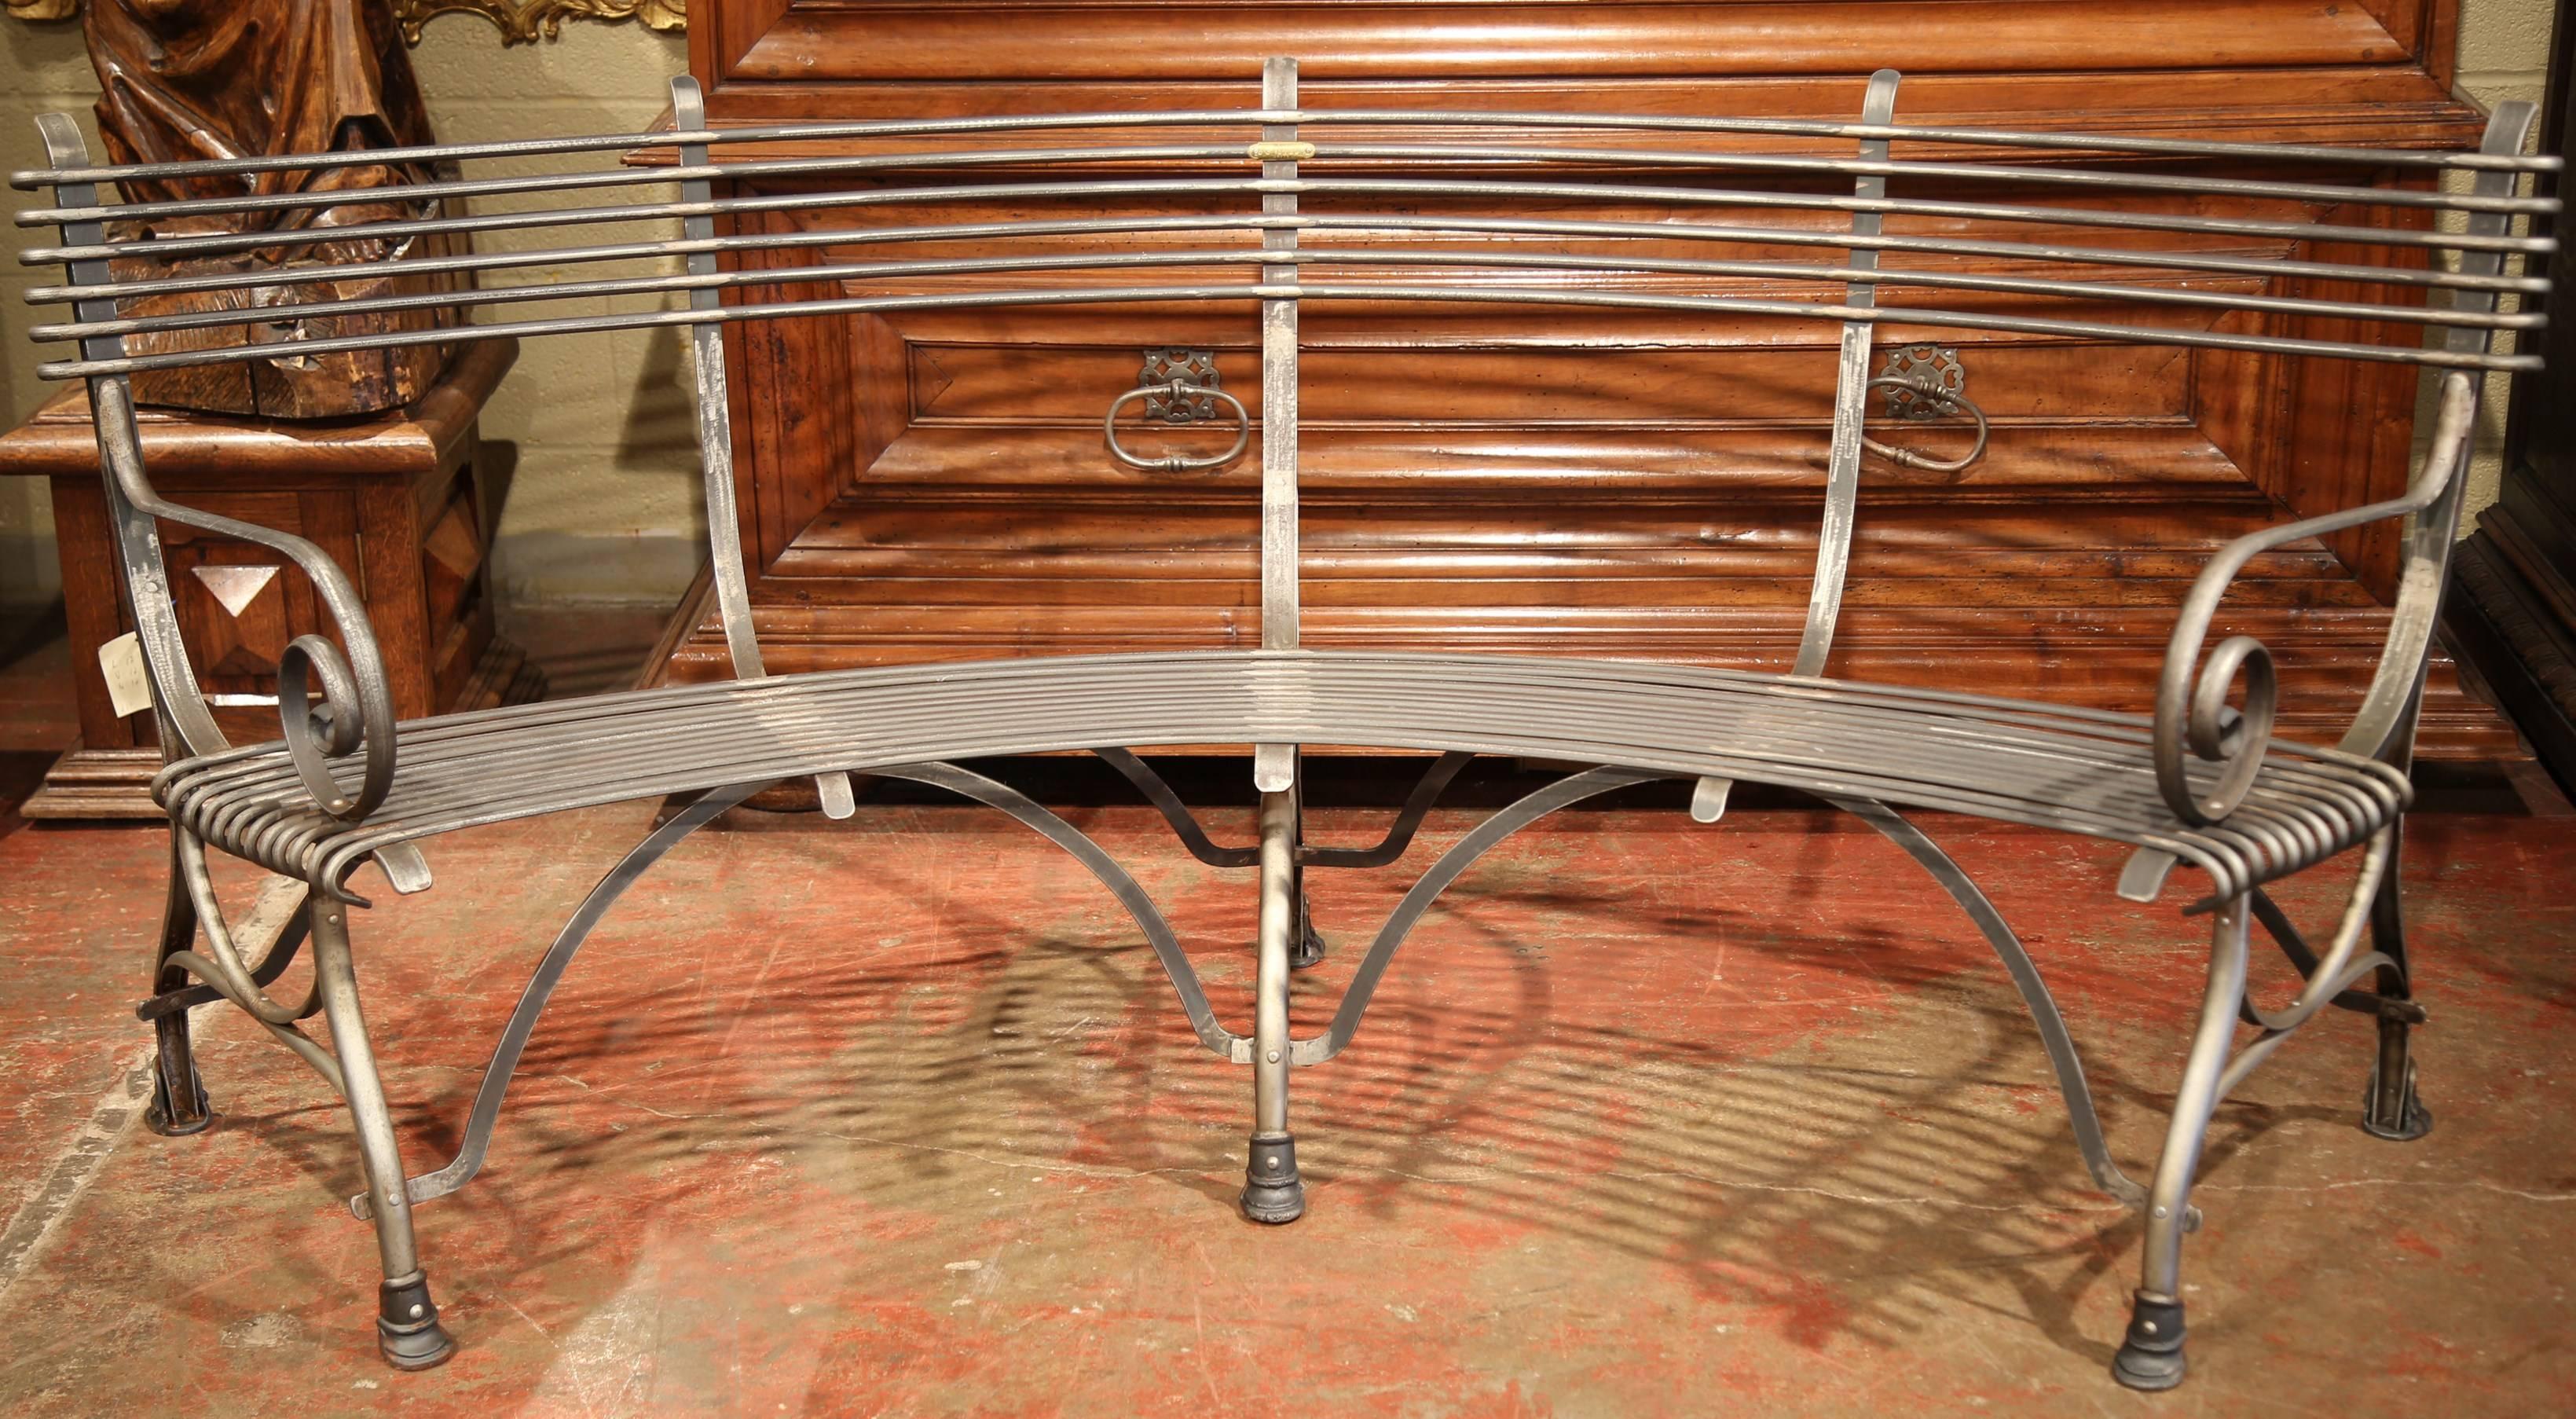 Contemporary French Polished Iron Curved Bench with Hoof Feet Signed Sauveur Arras